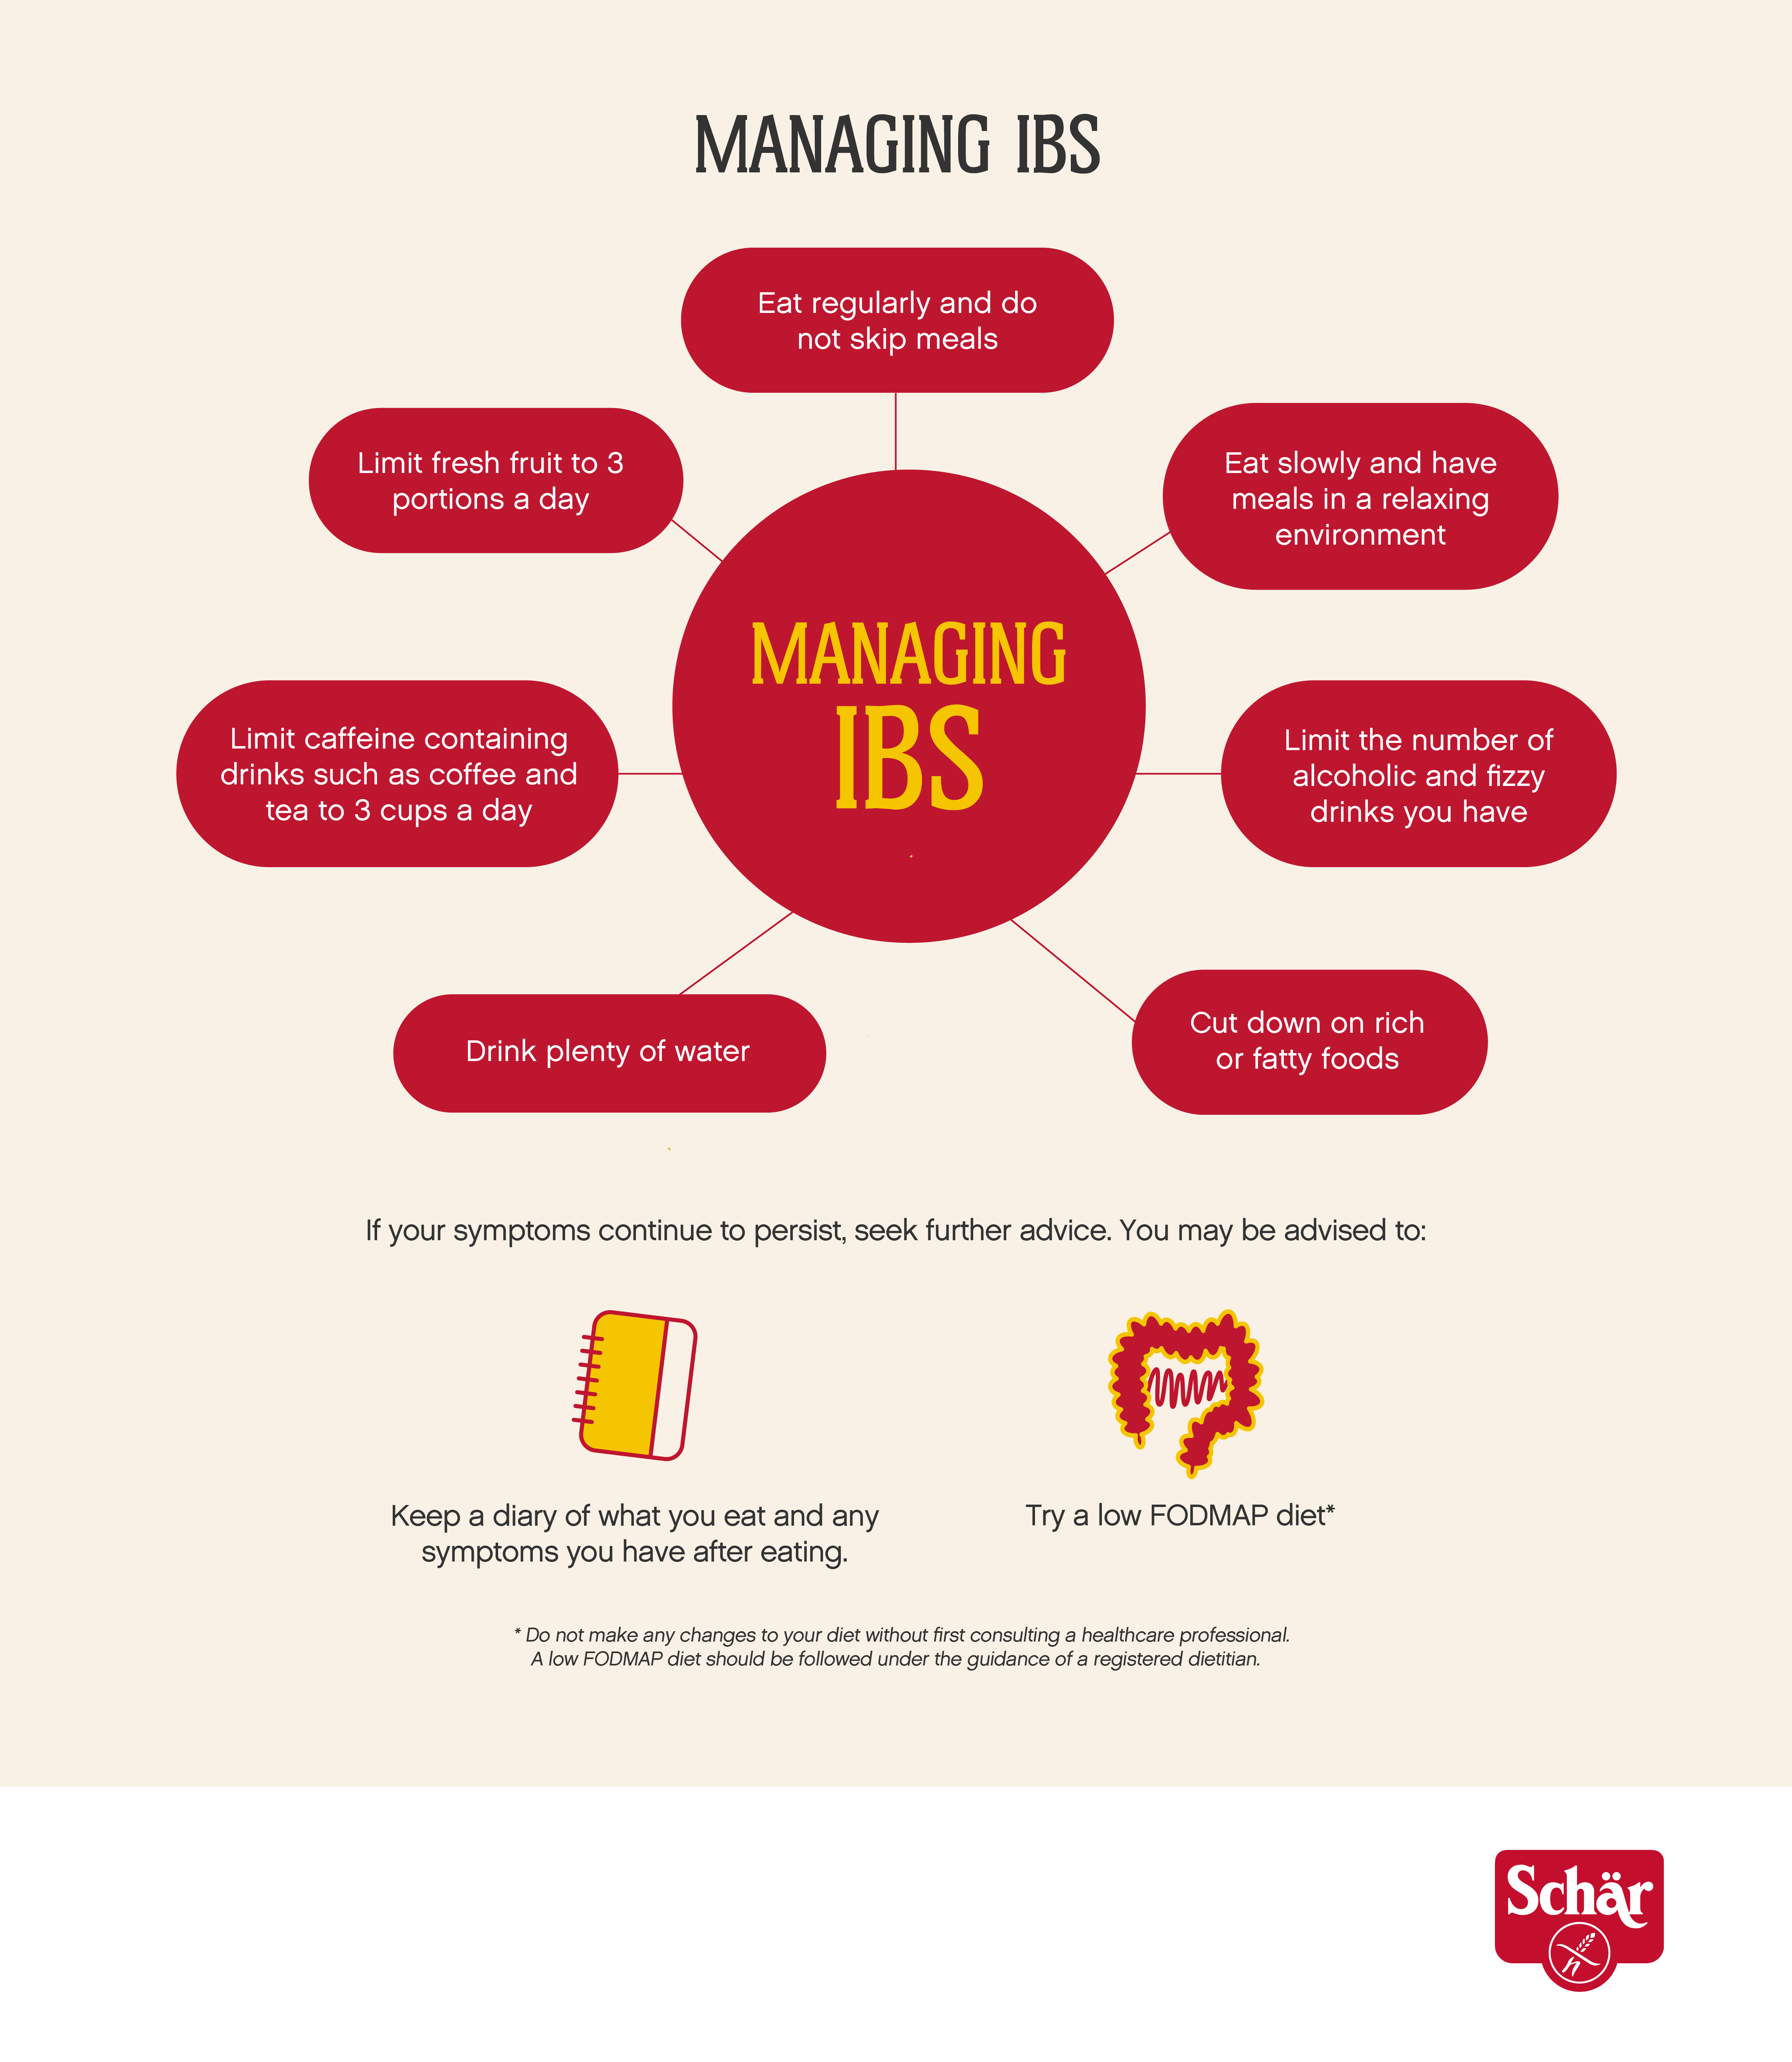 Infographic showing ways to ease IBS, all also mentioned in the text except: 1. not skipping meals and 2. cutting down on fatty foods